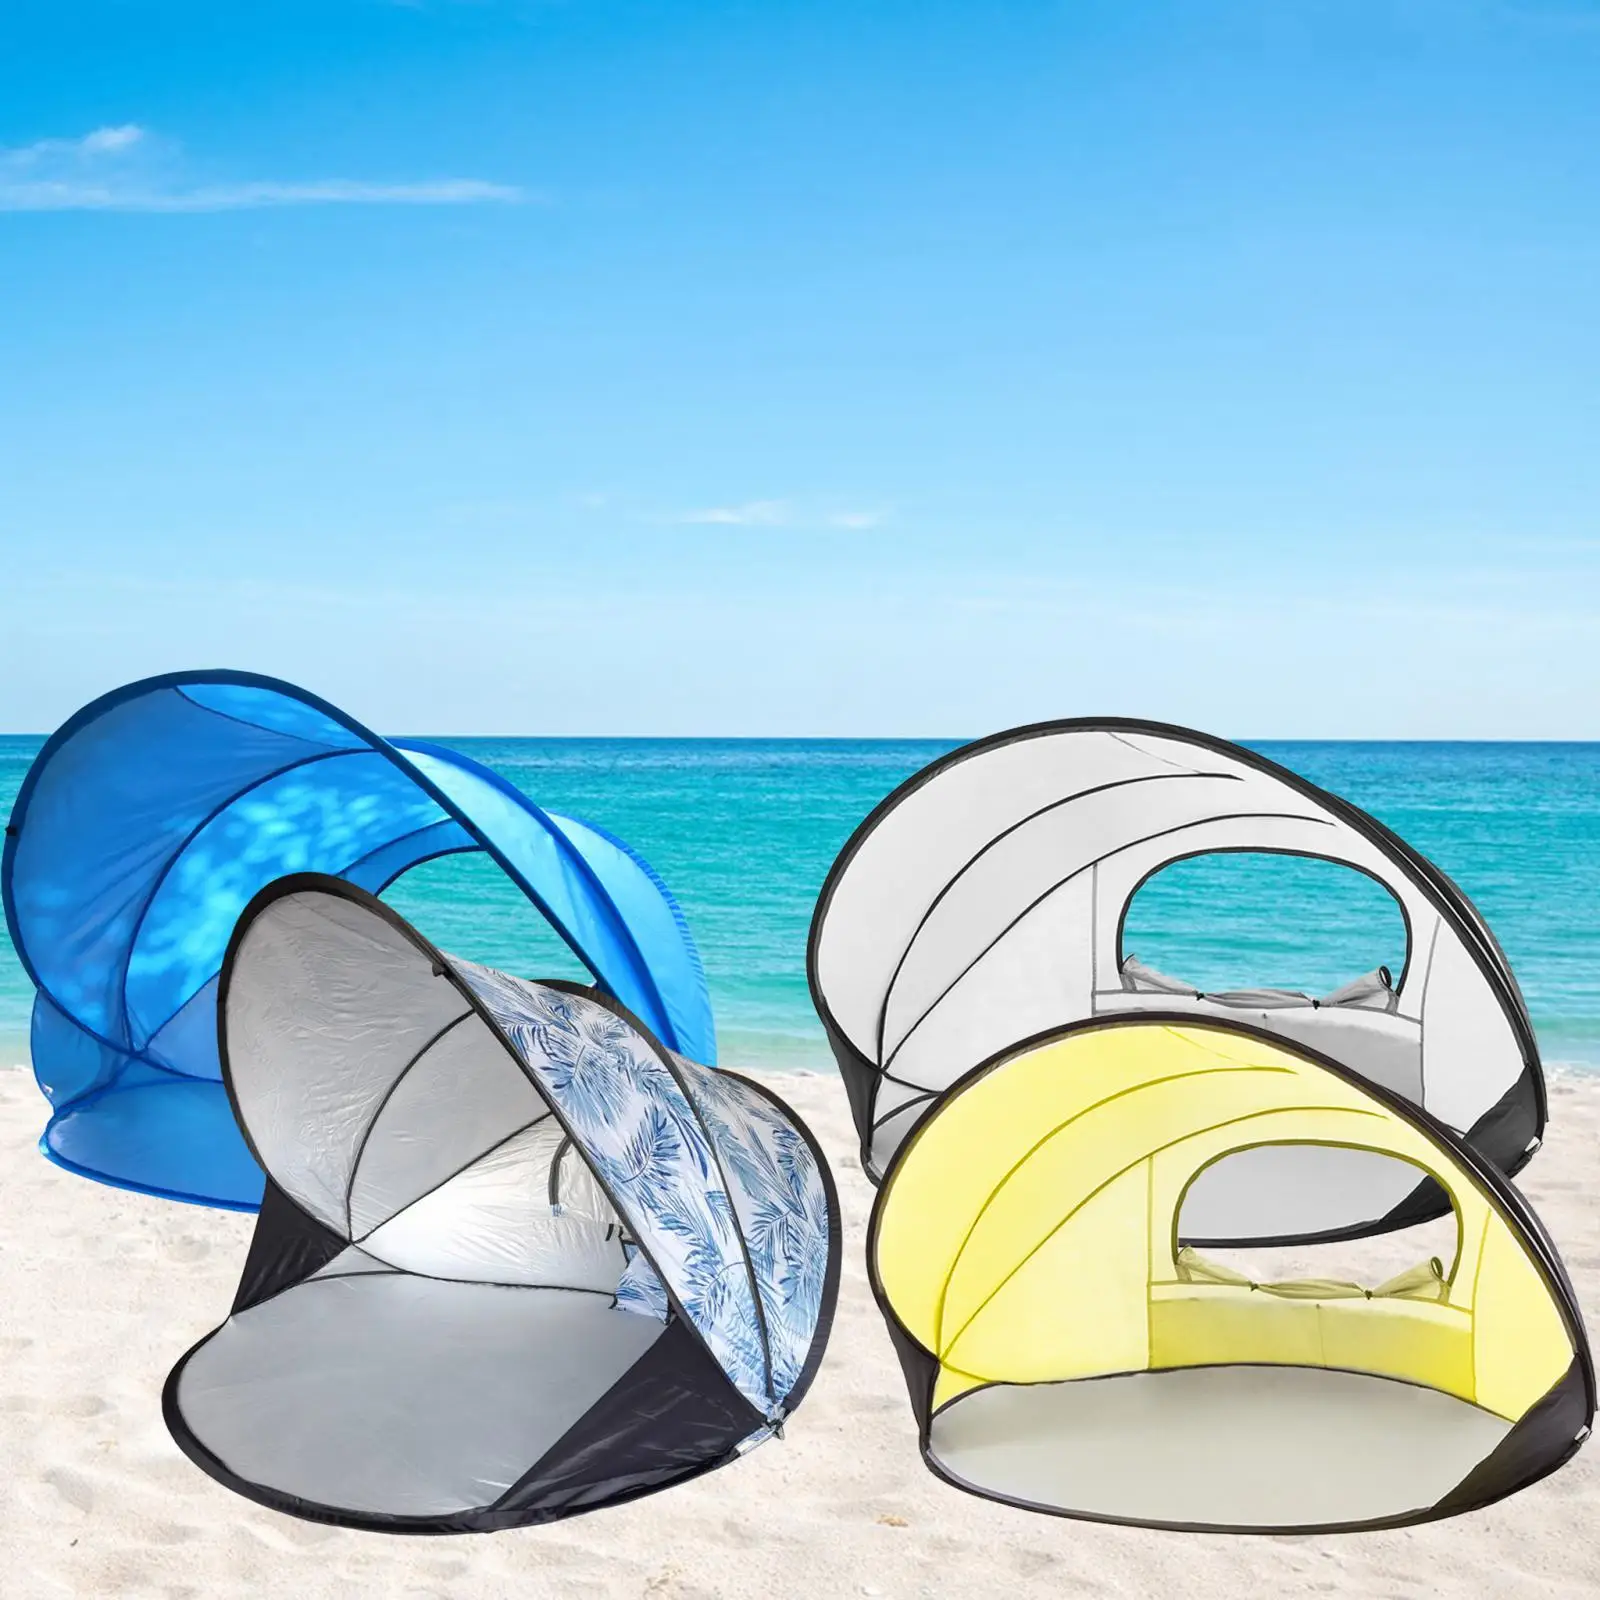 Pop up Beach Tent Sun Shelter 2 People Durable Structure for Weekend Trip Relaxing Multifunctional with Carrying Bag Waterproof